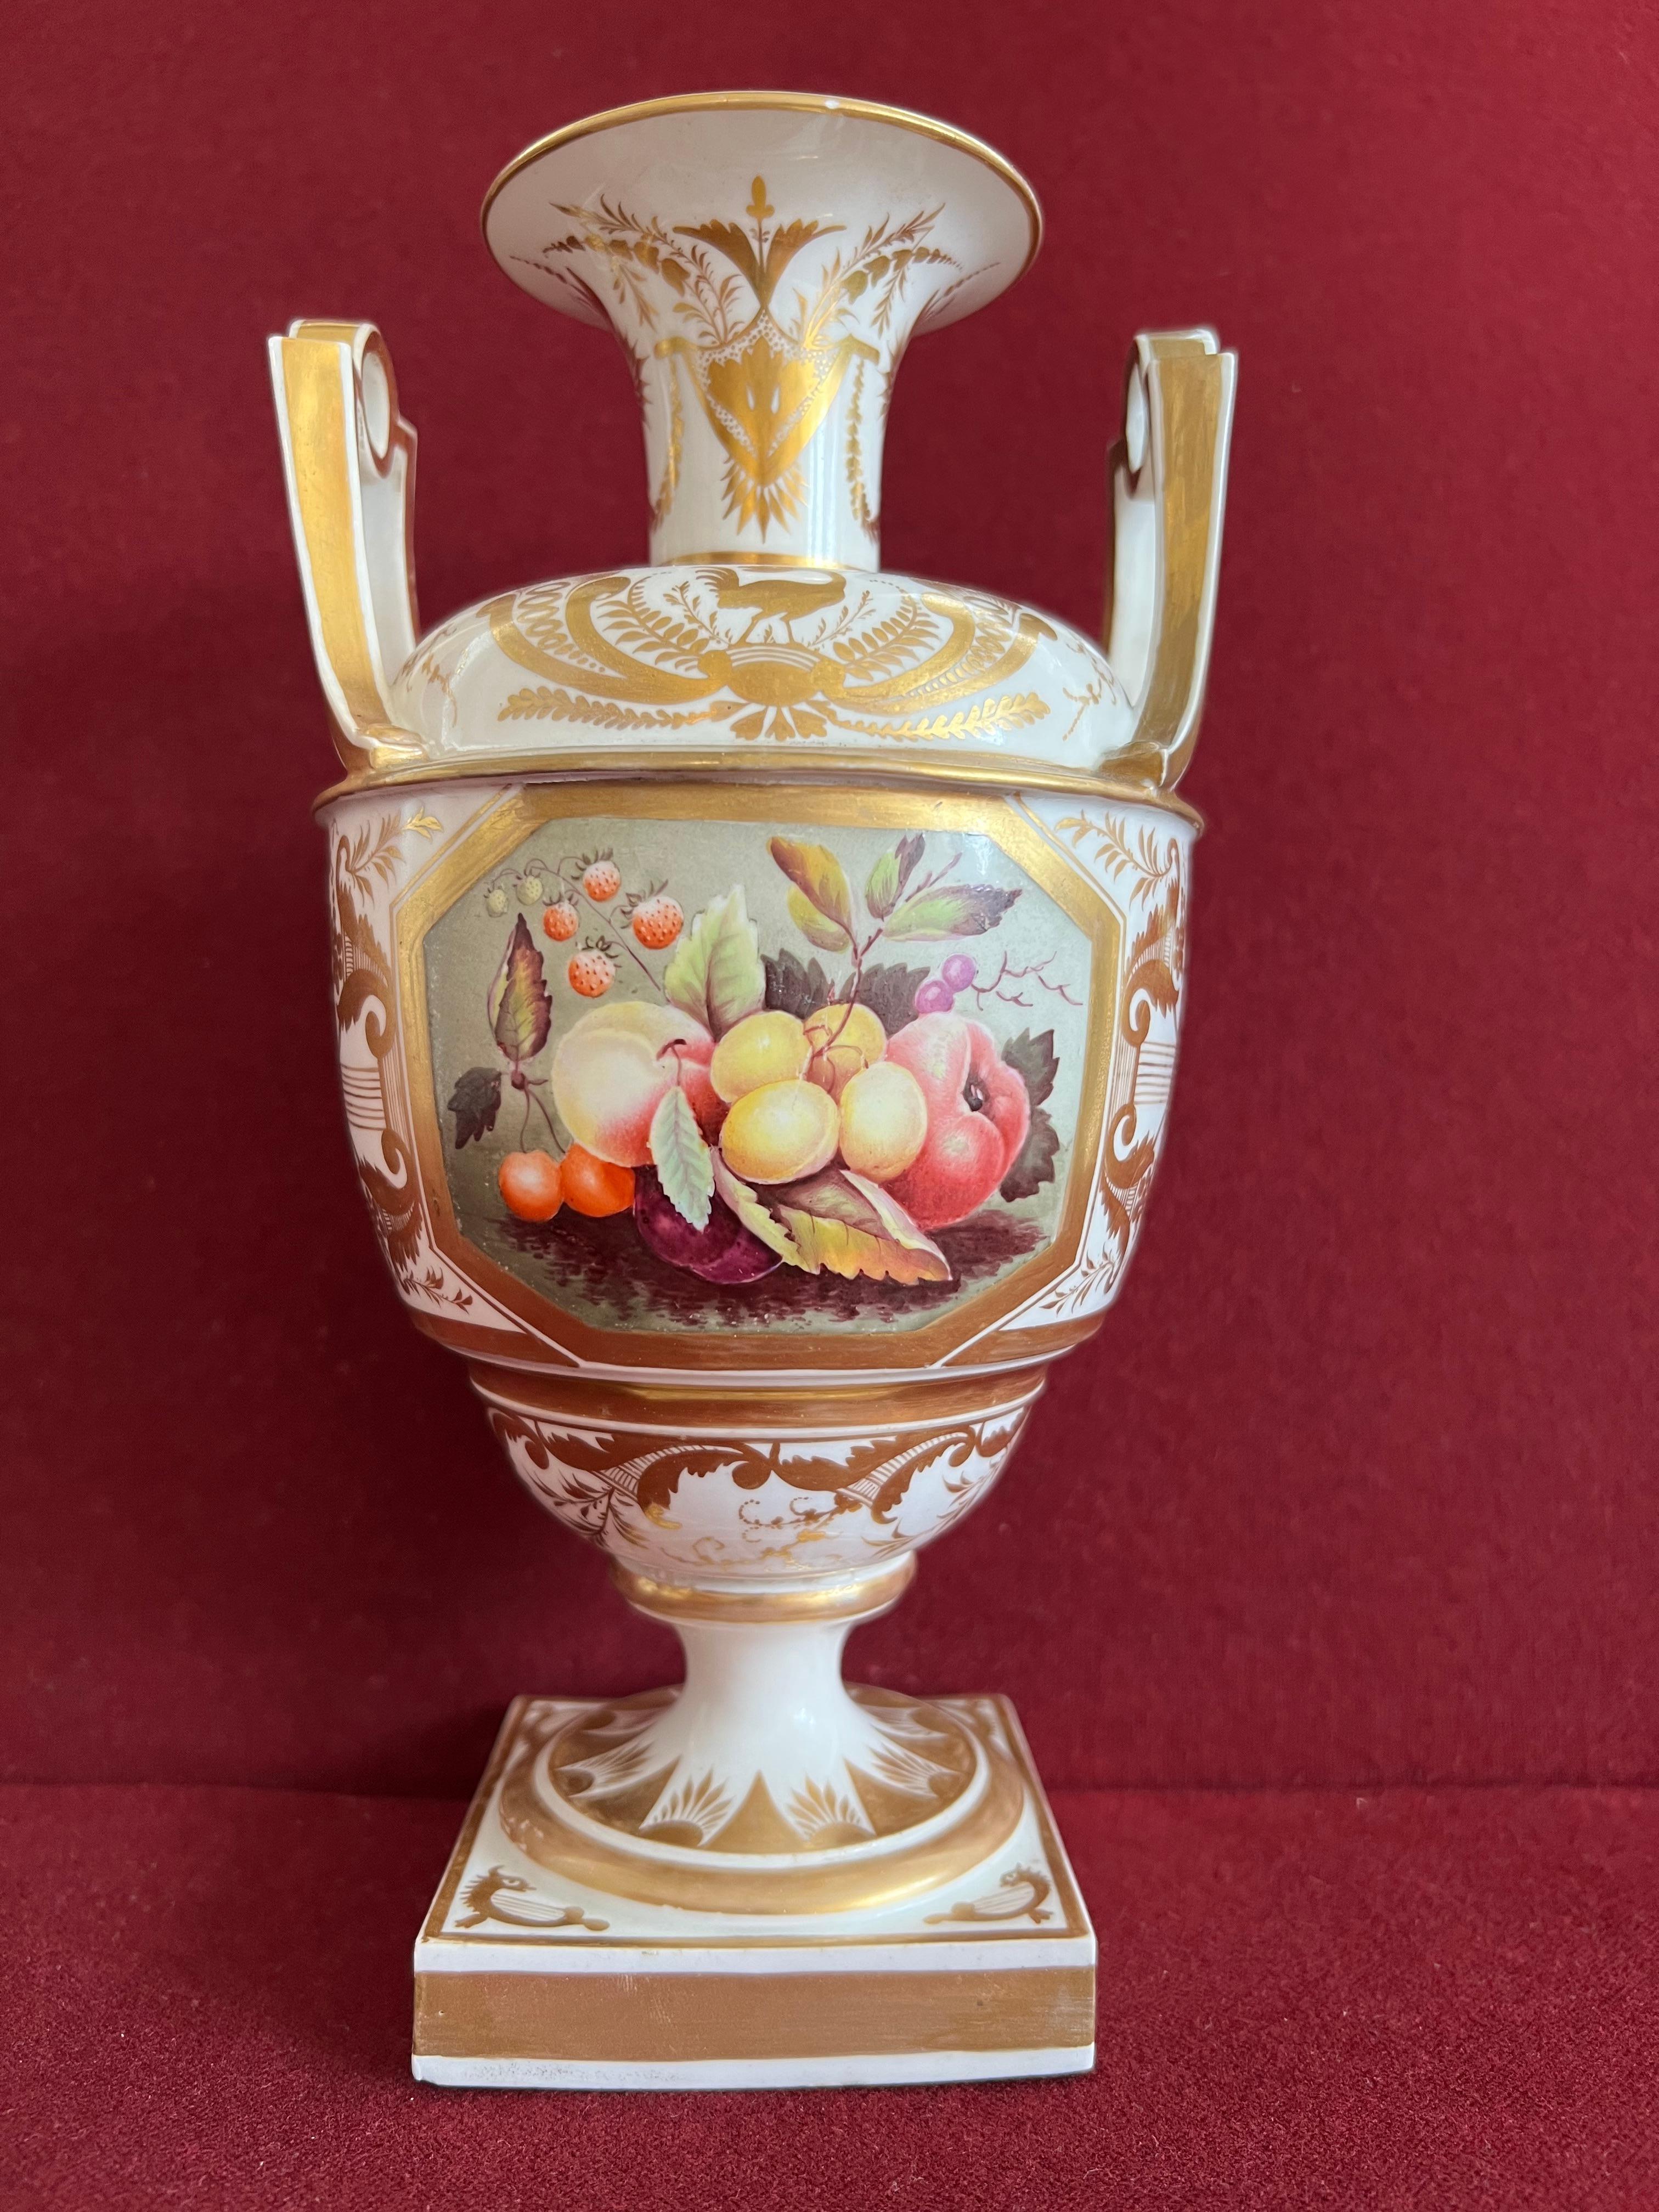 A rare Derby porcelain vase c.1815 of classical form decorated with a finely painted panel of fruit in the manner of Thomas Steel. Finely executed gilding in the manner of James Clark.

Condition: Professional restoration to one handle and the